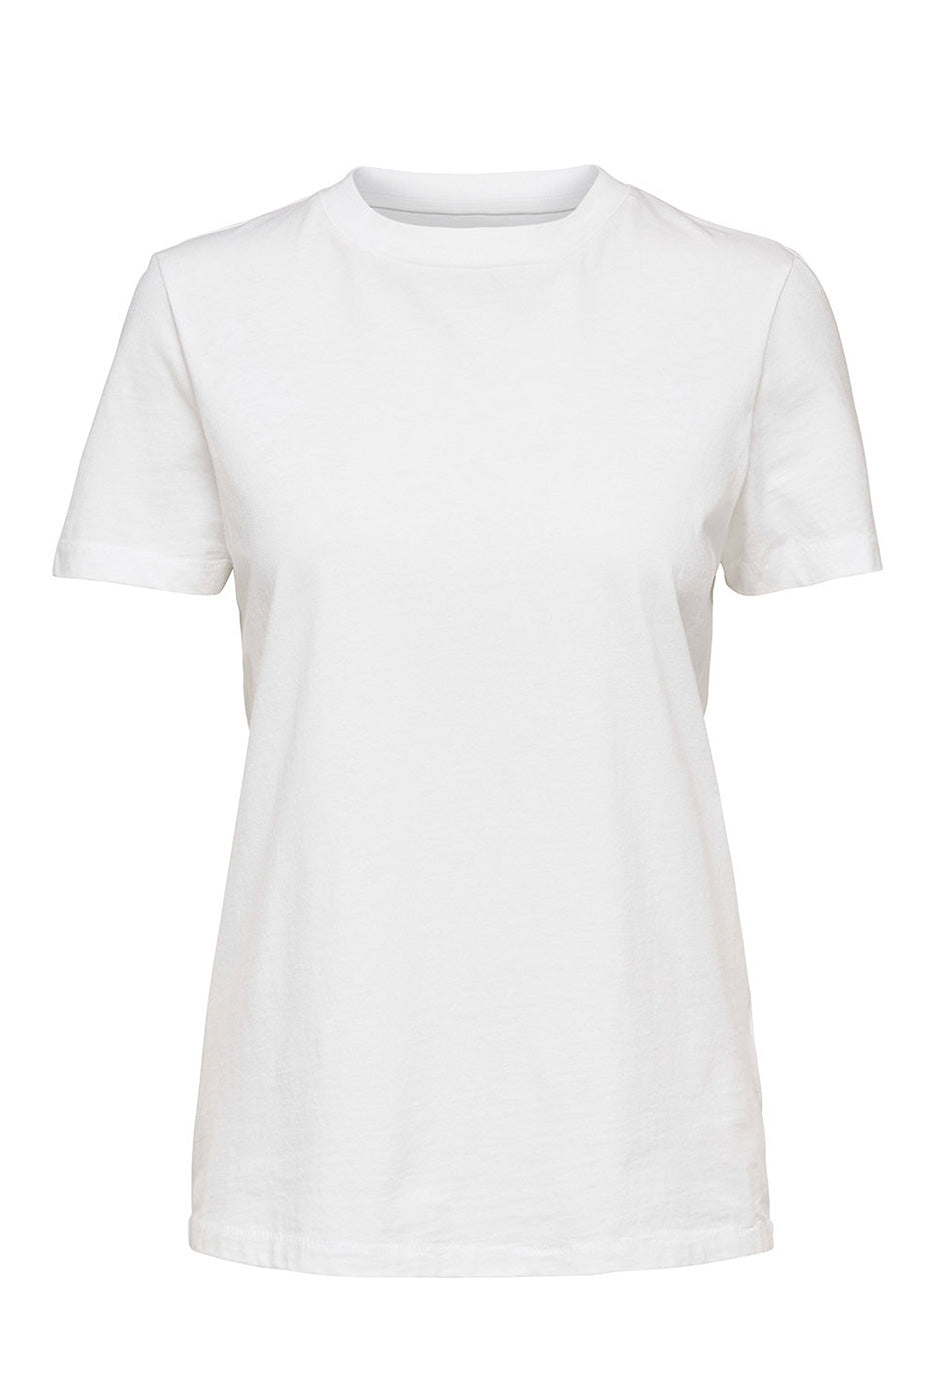 SELECTED FEMME WHITE MY PERFECT TEE